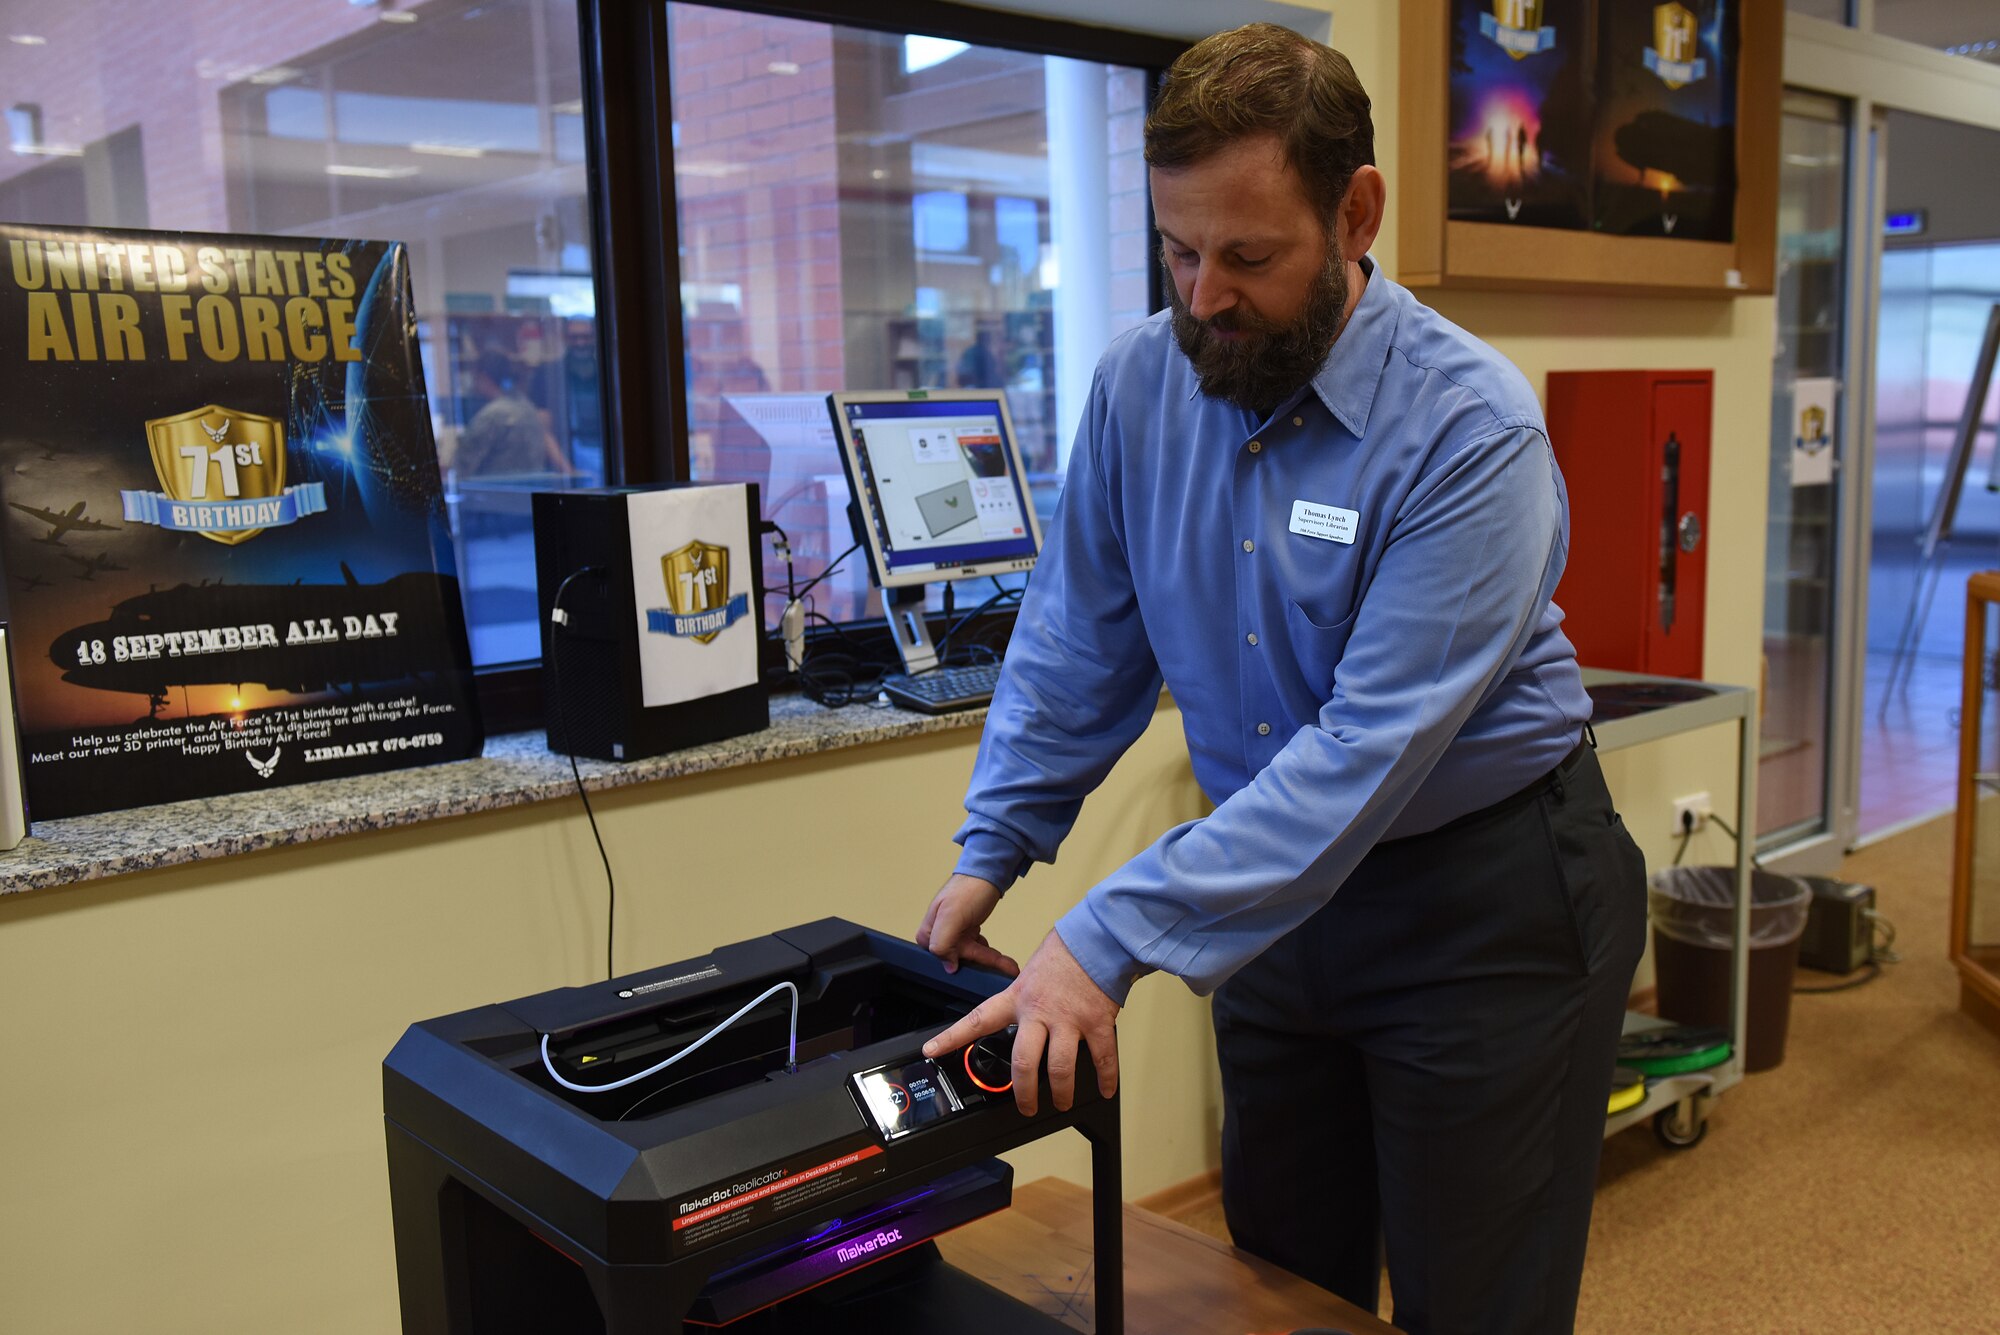 Librarian Thomas Lynch demonstrates the capabilities of a MakerBot Replicator 3-D printer at Incirlik Air Base, Turkey, Sept. 18, 2018.